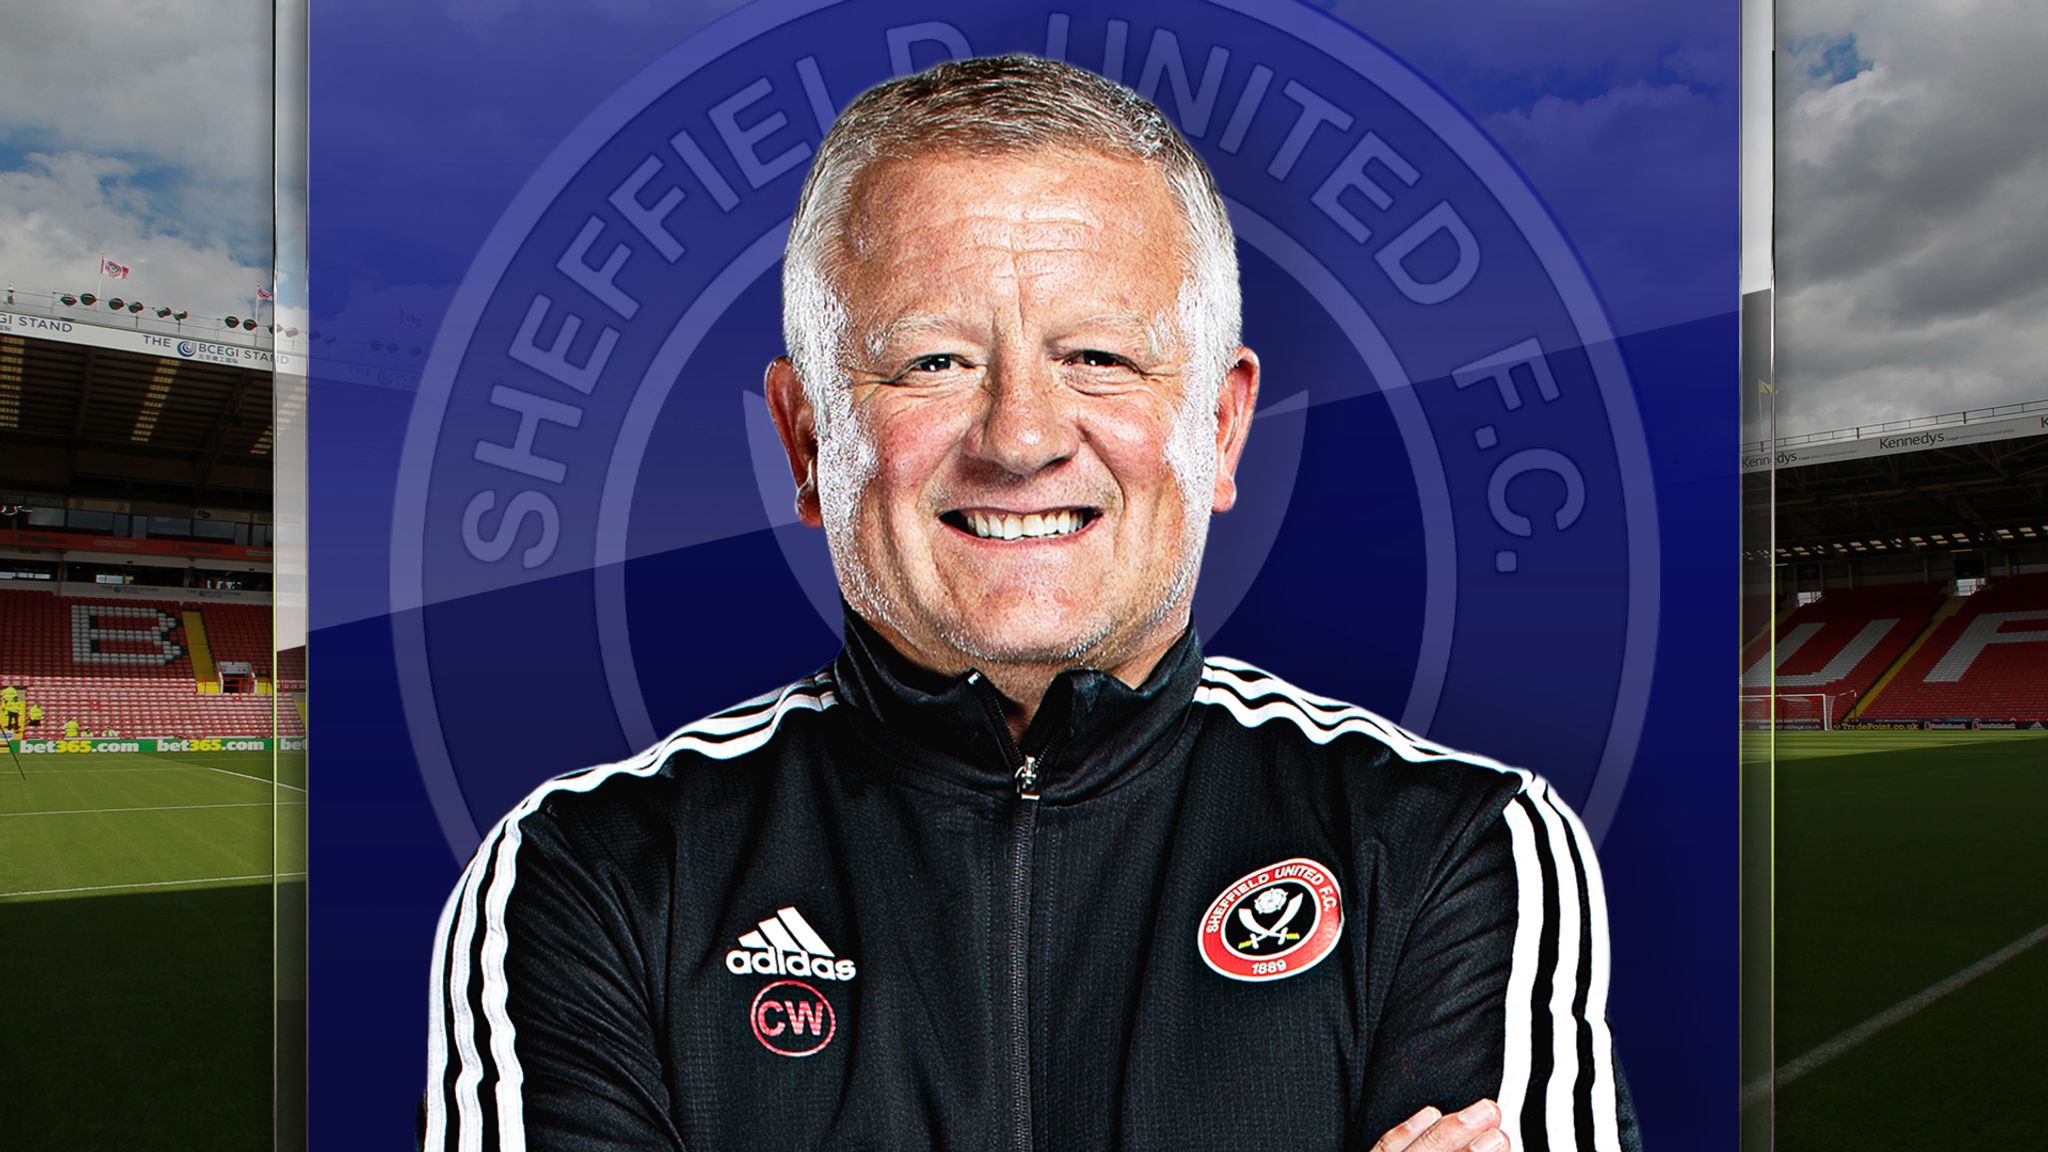 Sheffield United S Chris Wilder Survival Scoring Goals And Dominating Sheffield For Decades Football News Sky Sports